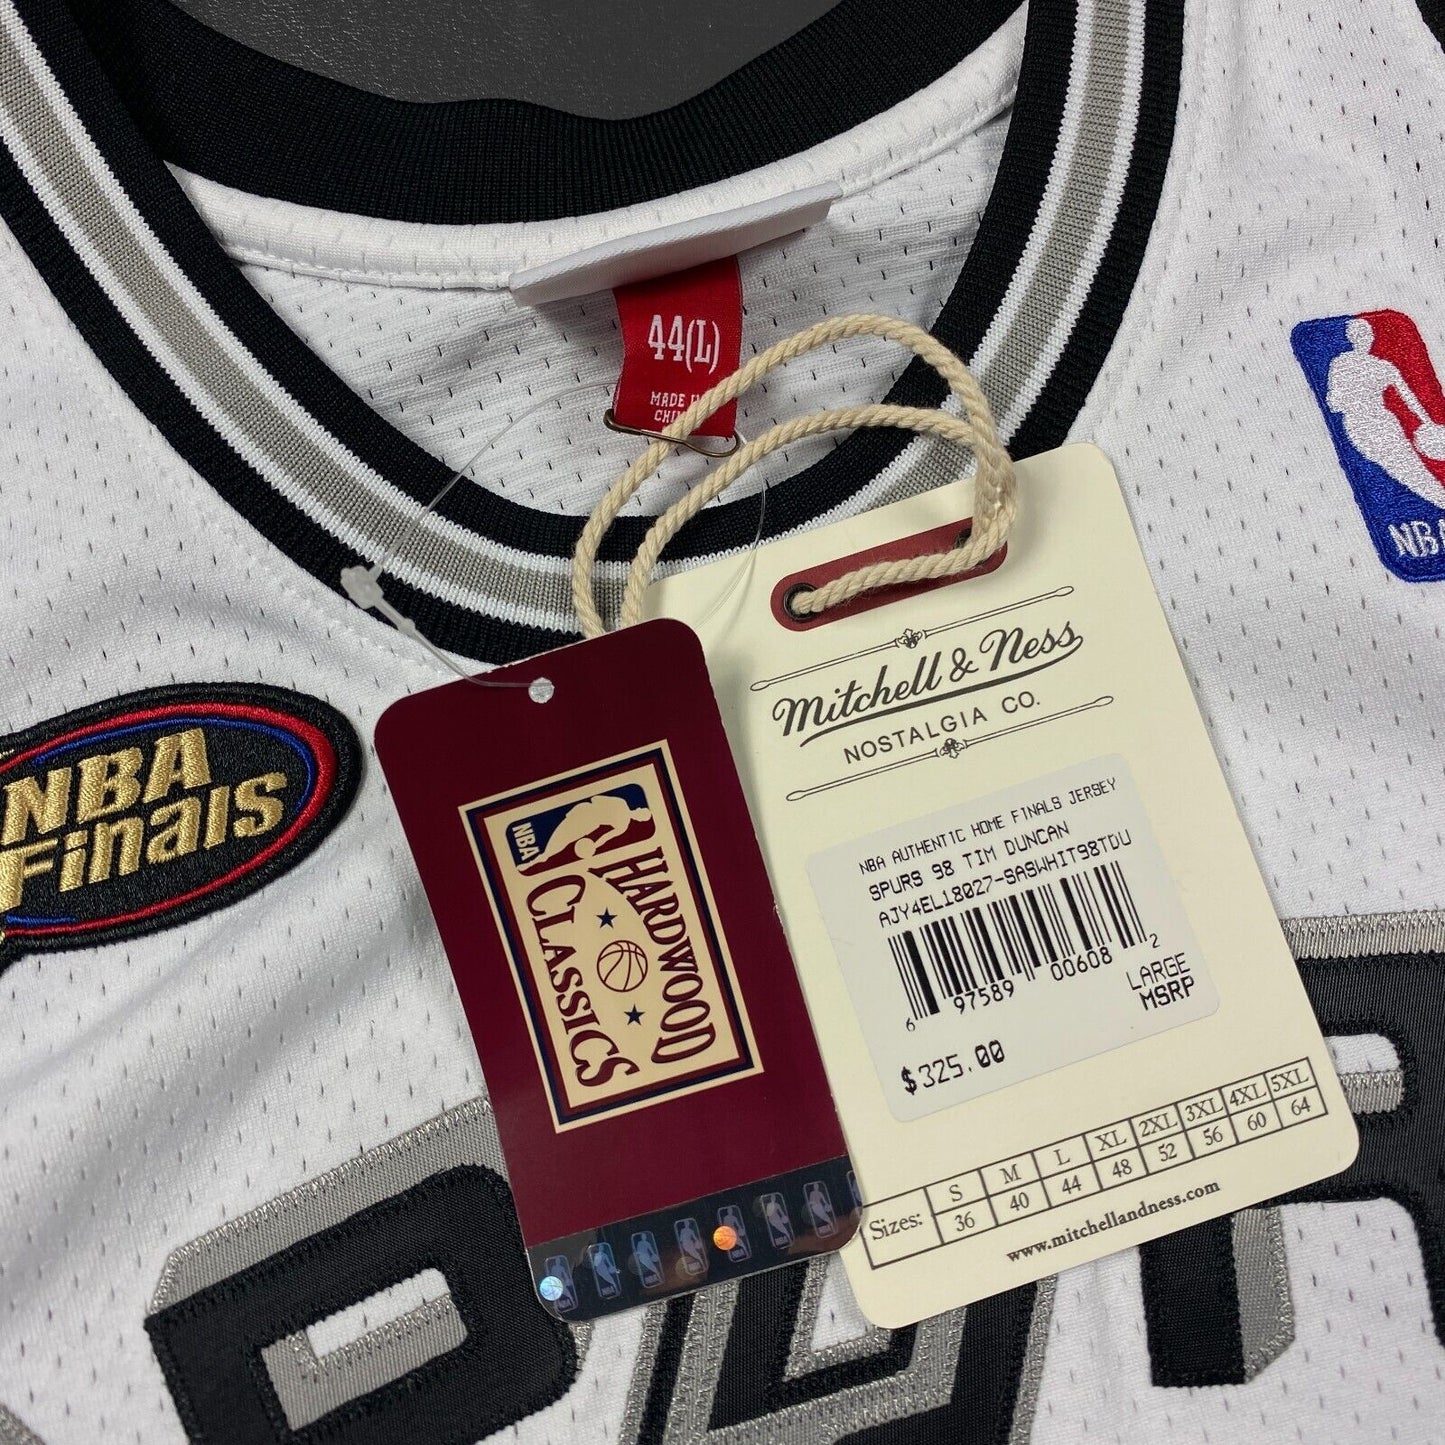 100% Authentic Tim Duncan Mitchell Ness 98 99 NBA Finals Jersey Size 44 L Mens